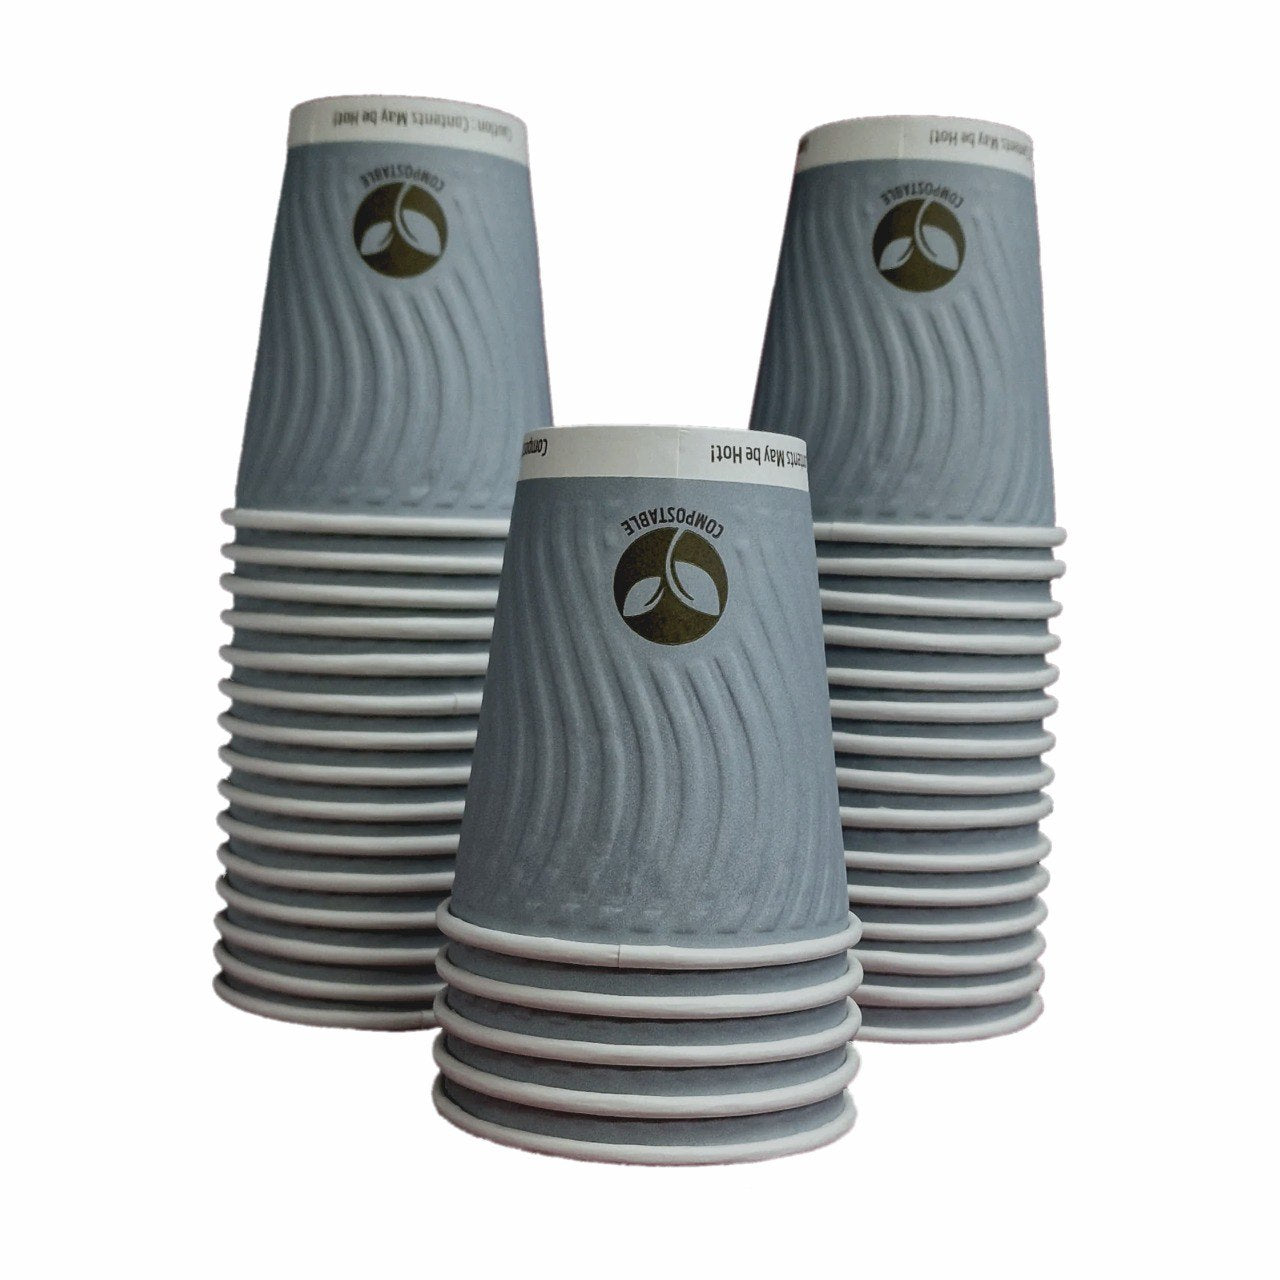 700 Eco Friendly Compostable Disposable Coffee Cups for Hot &amp; Cold Drinks